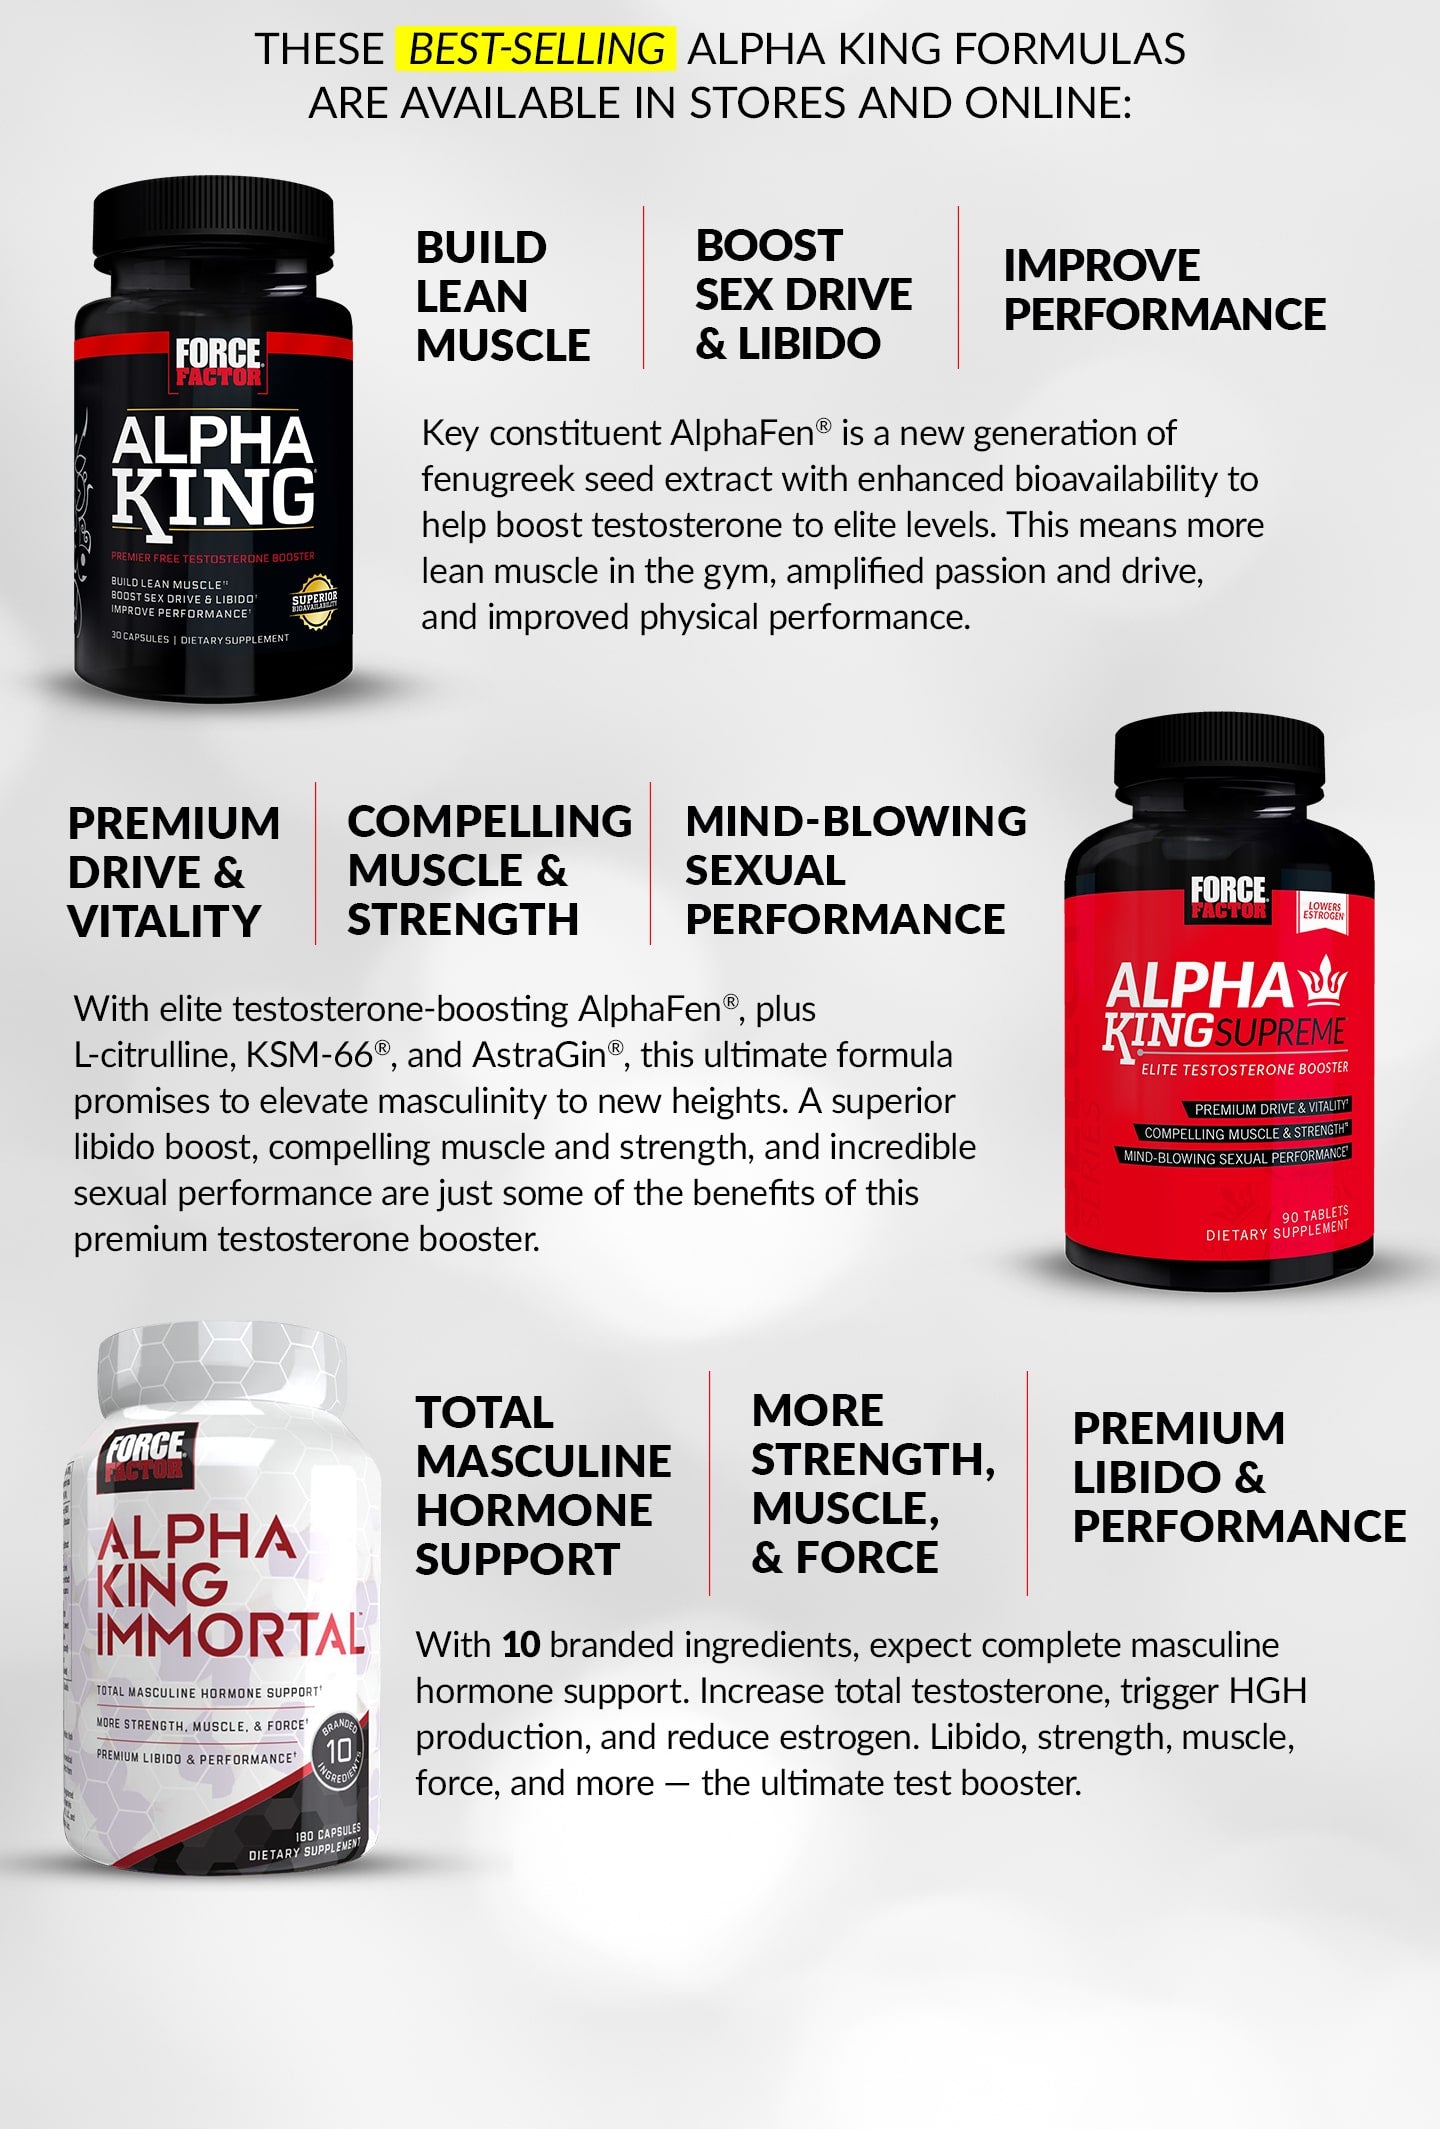 THESE BEST-SELLING ALPHA KING FORMULAS ARE AVAILABLE IN STORES AND ONLINE: Alpha King® - BUILD LEAN MUSCLE, BOOST SEX DRIVE & LIBIDO, IMPROVE PERFORMANCE. Key constituent AlphaFen® is a new generation of fenugreek seed extract with enhanced bioavailability to help boost testosterone to elite levels. This means more lean muscle in the gym, amplified passion and drive, and improved physical performance. Alpha King Supreme® - PREMIUM DRIVE & VITALITY, COMPELLING MUSCLE & STRENGTH, MIND-BLOWING SEXUAL PERFORMANCE. With elite testosterone-boosting AlphaFen®, plus L-citrulline, KSM-66®, and AstraGin®, this ultimate formula promises to elevate masculinity to new heights. A superior libido boost, compelling muscle and strength, and incredible sexual performance are just some of the benefits of this premium testosterone booster. Alpha King Immortal® - TOTAL MASCULINE HORMONE SUPPORT, MORE STRENGTH, MUSCLE, & FORCE, PREMIUM LIBIDO & PERFORMANCE. With 10 branded ingredients, expect complete masculine hormone support. Increase total testosterone, trigger HGH production, and reduce estrogen. Libido, strength, muscle, force, and more – the ultimate test booster.